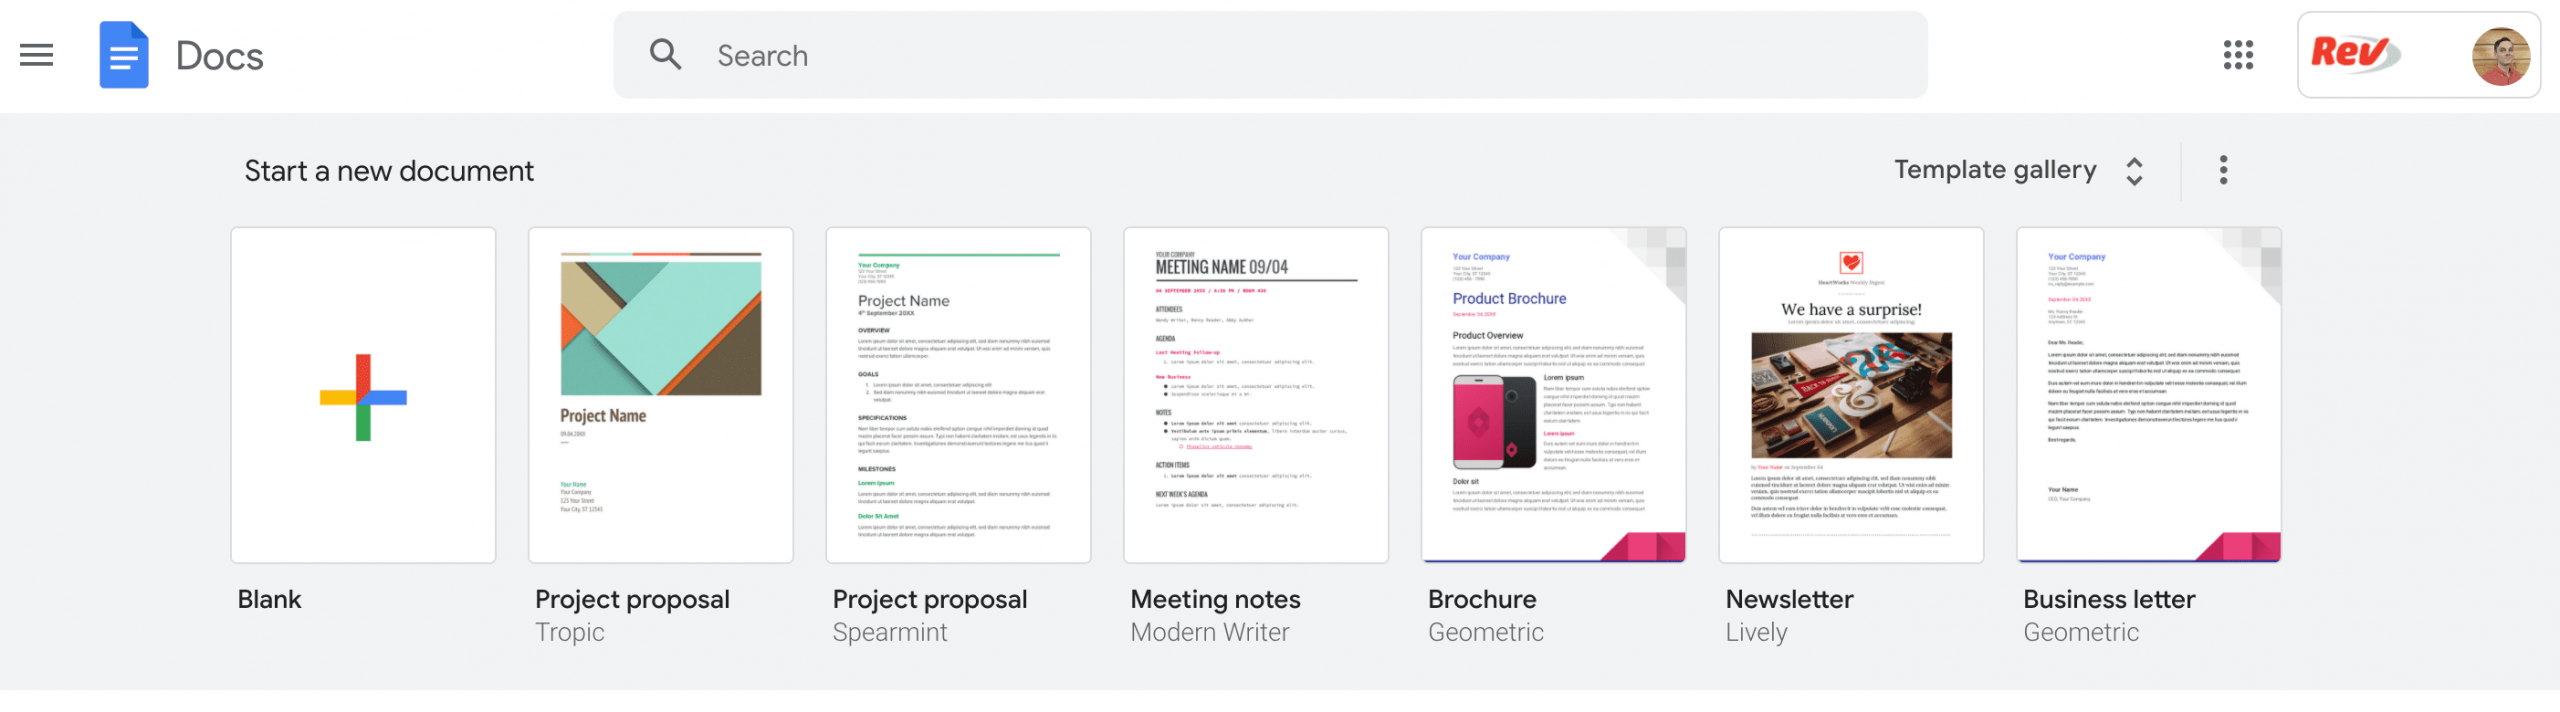 Screenshot of Google Docs interface where a user is opening a new document.